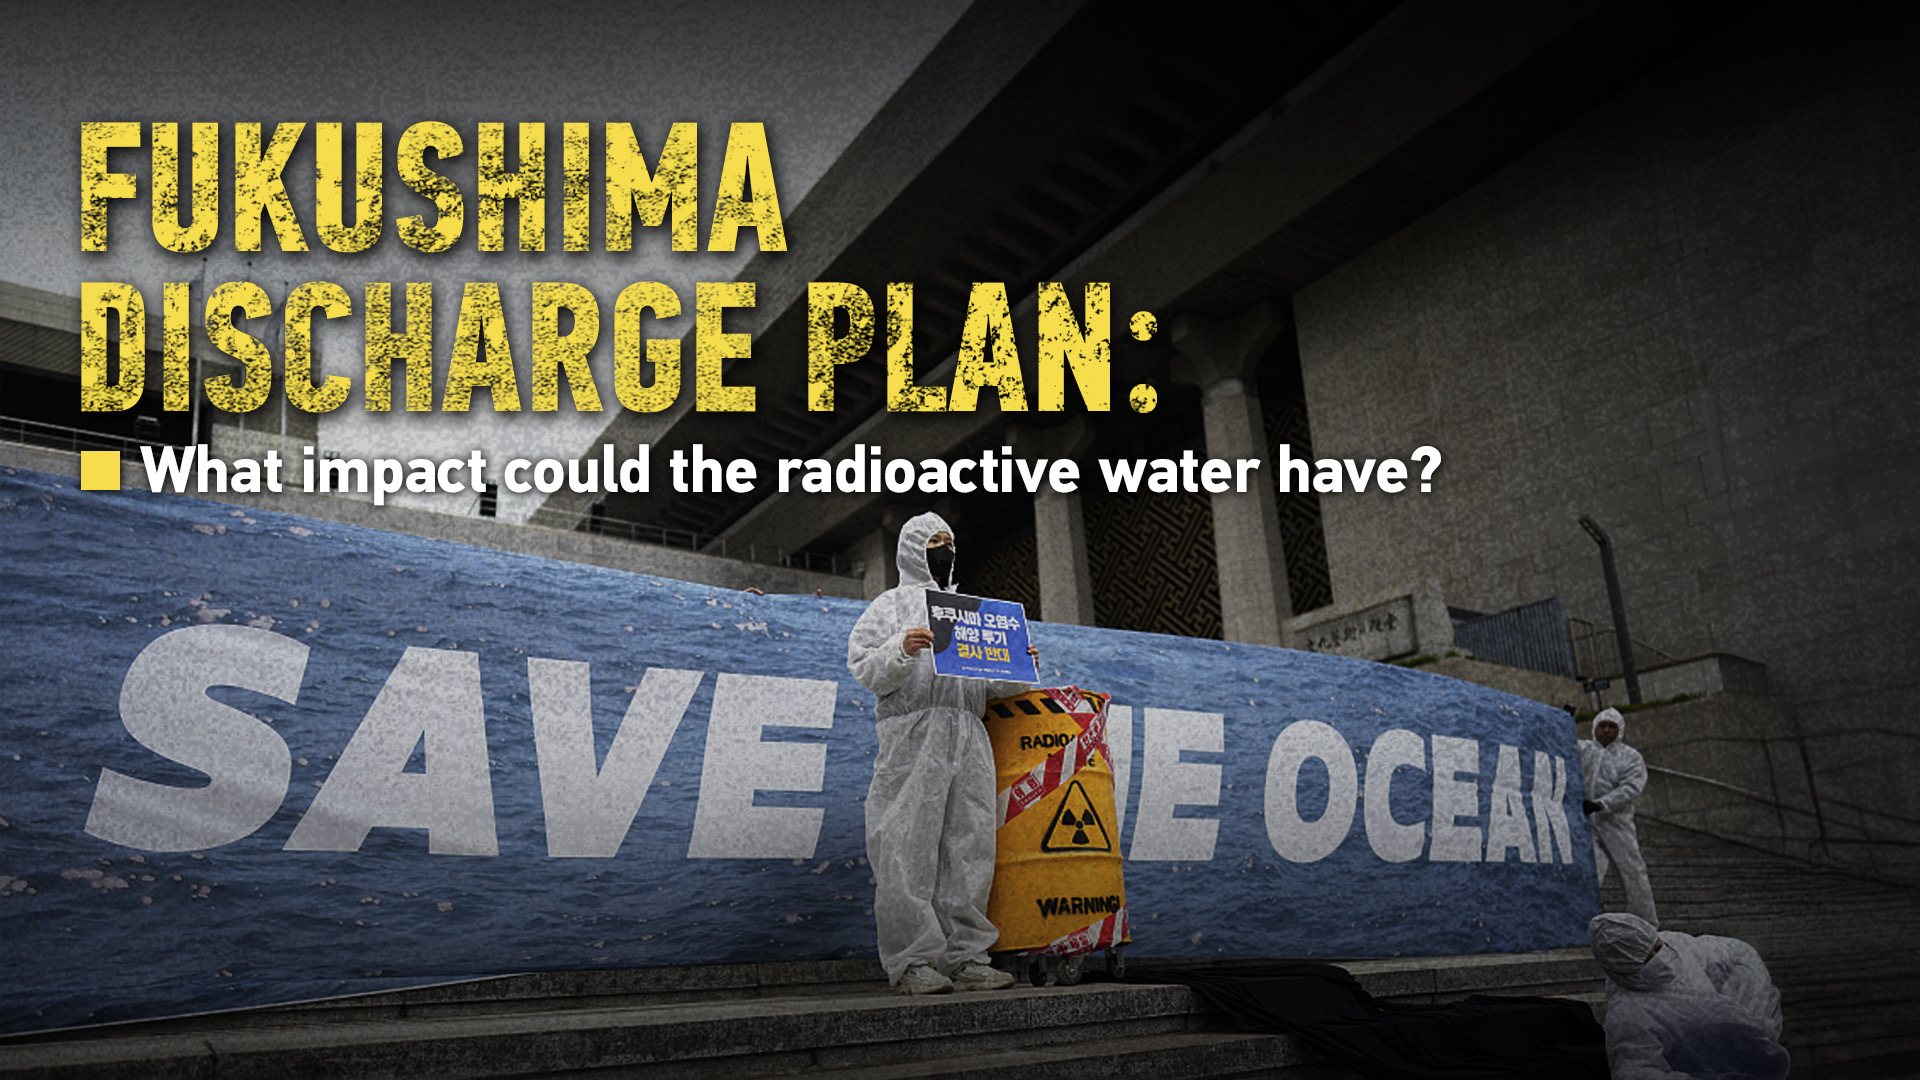 Fukushima discharge plan: What impact could the radioactive water have?